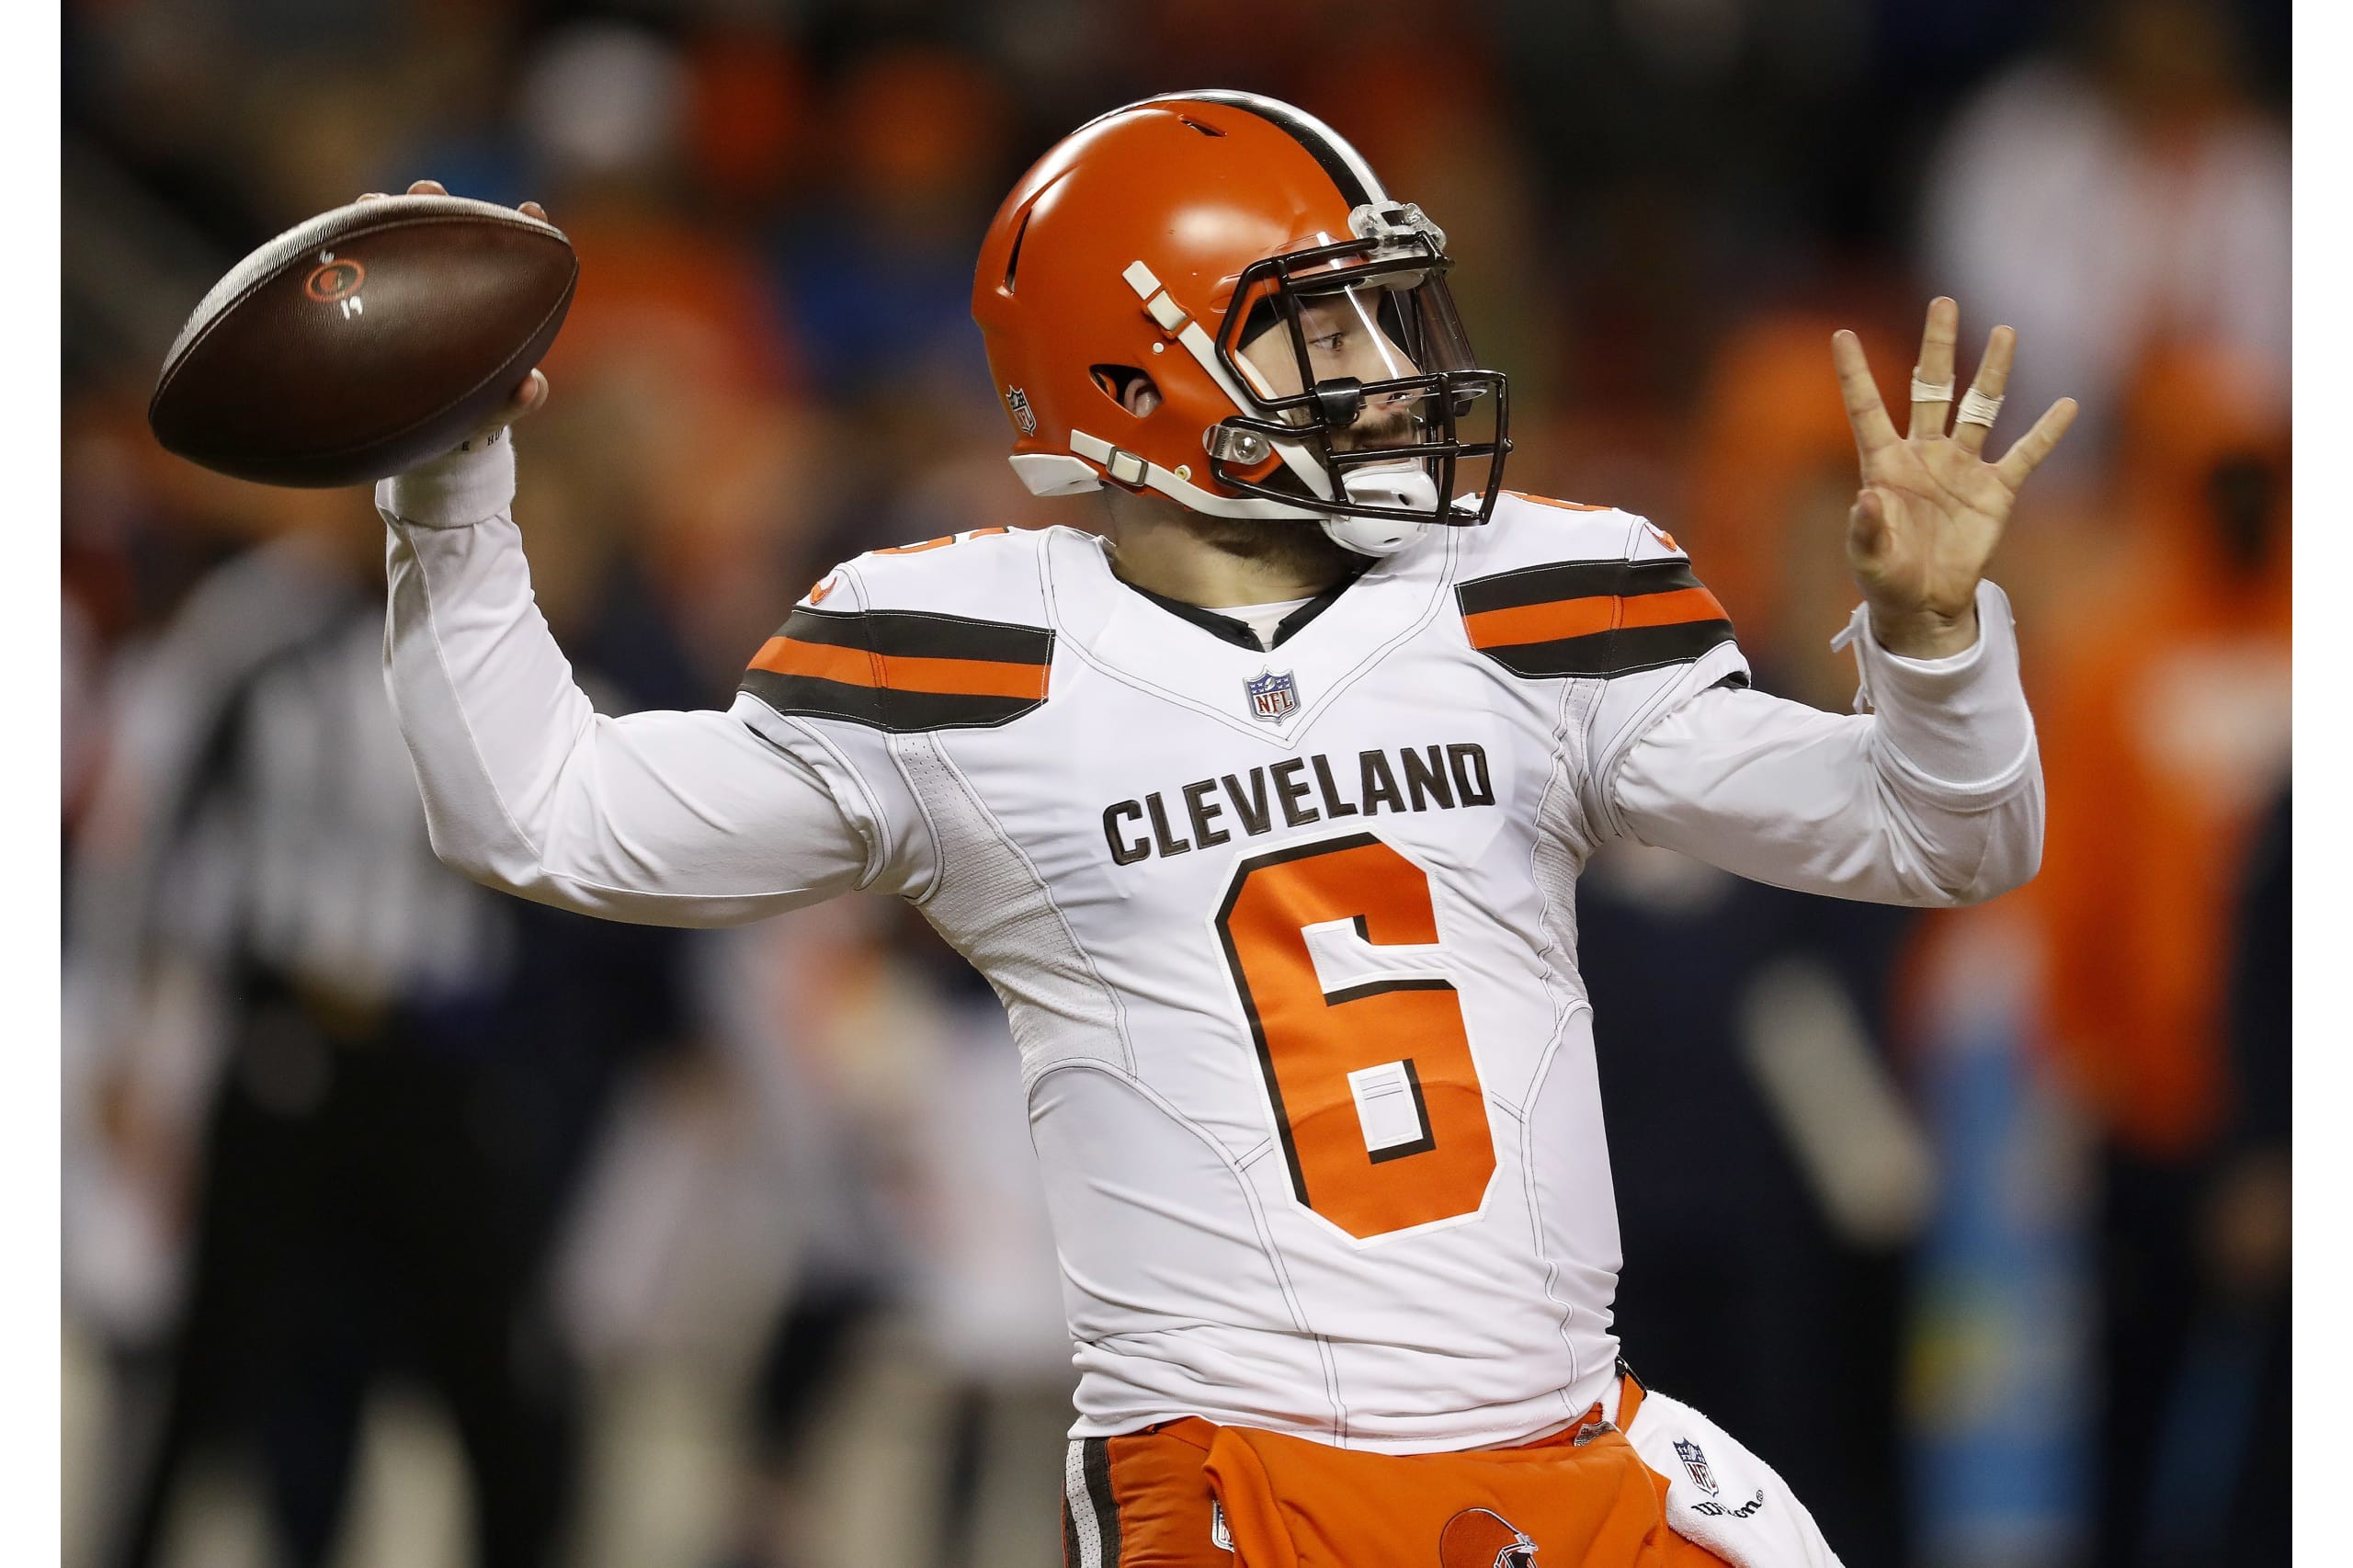 Browns QB Baker Mayfield Has Another Hater After Saturday’s Beer